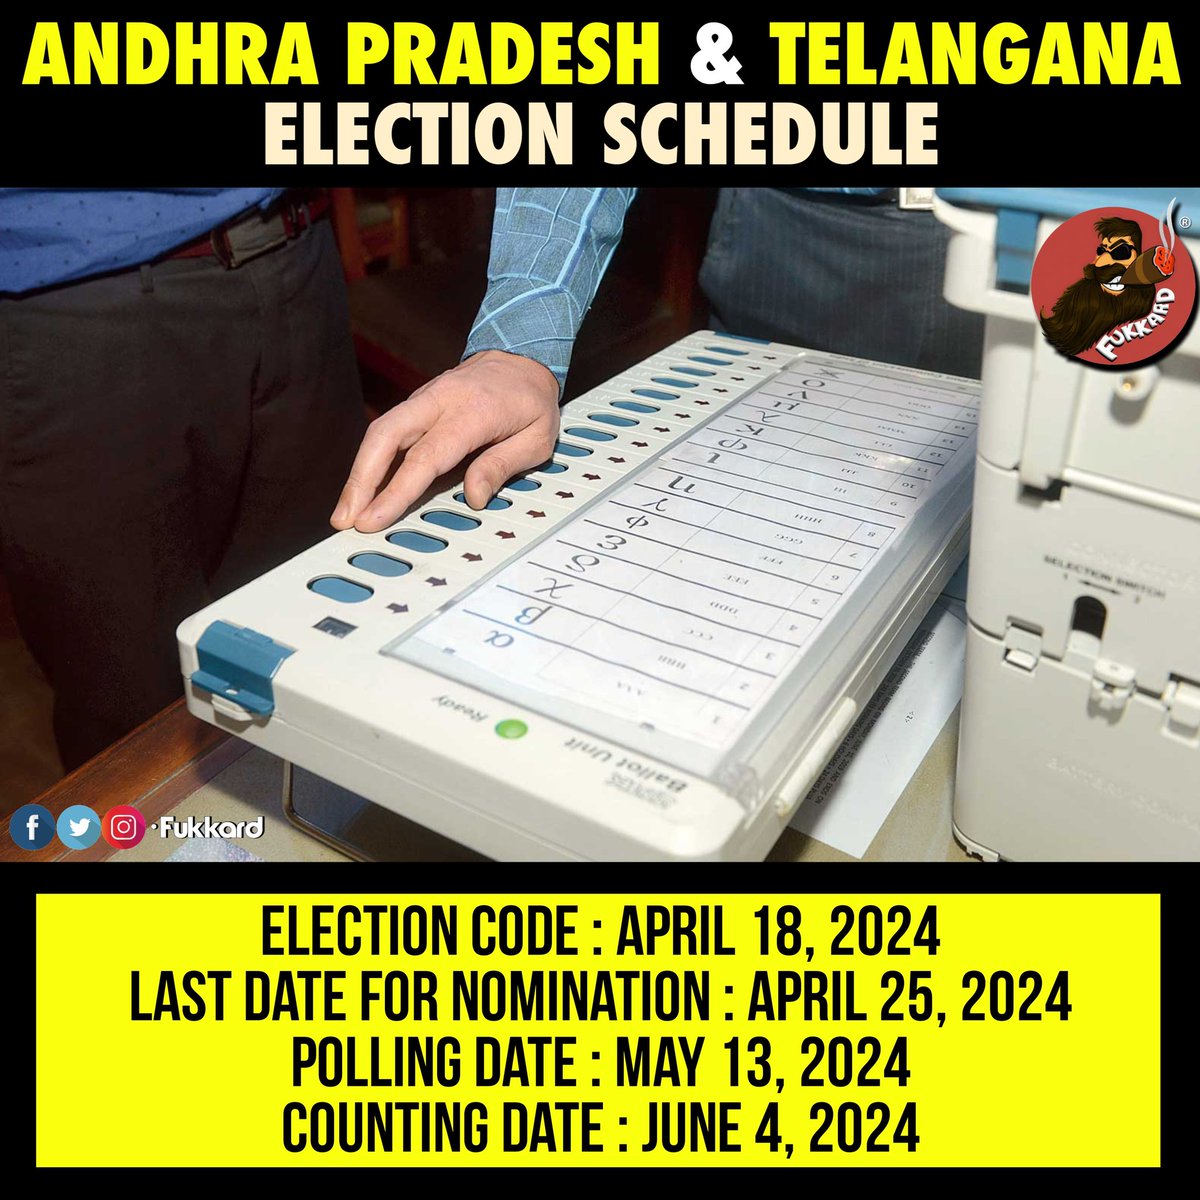 Telugu States Elections Schedule 2024. #Elections2024 

#AndhraPradeshElections2024 #TelanganaElections2024